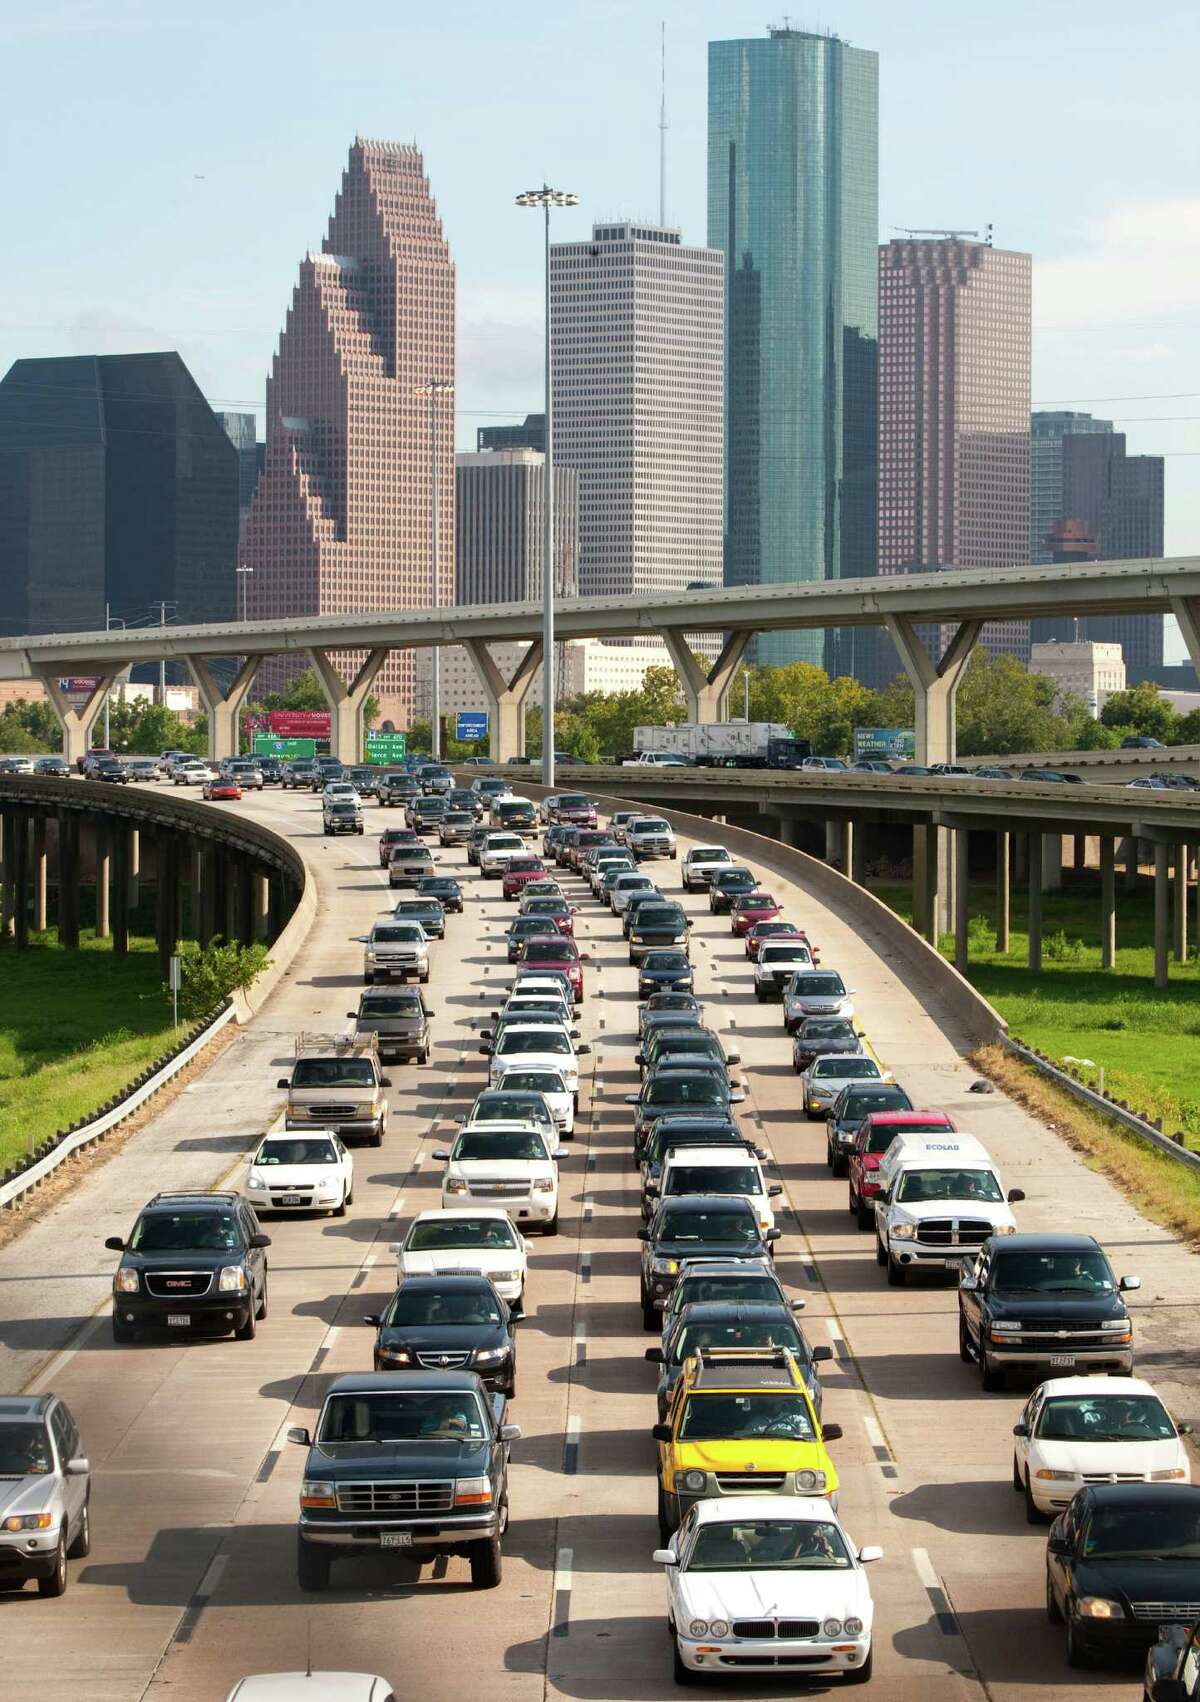 The Houston region has been rated as having the sixth worse commute in the nation based on hours of delay.